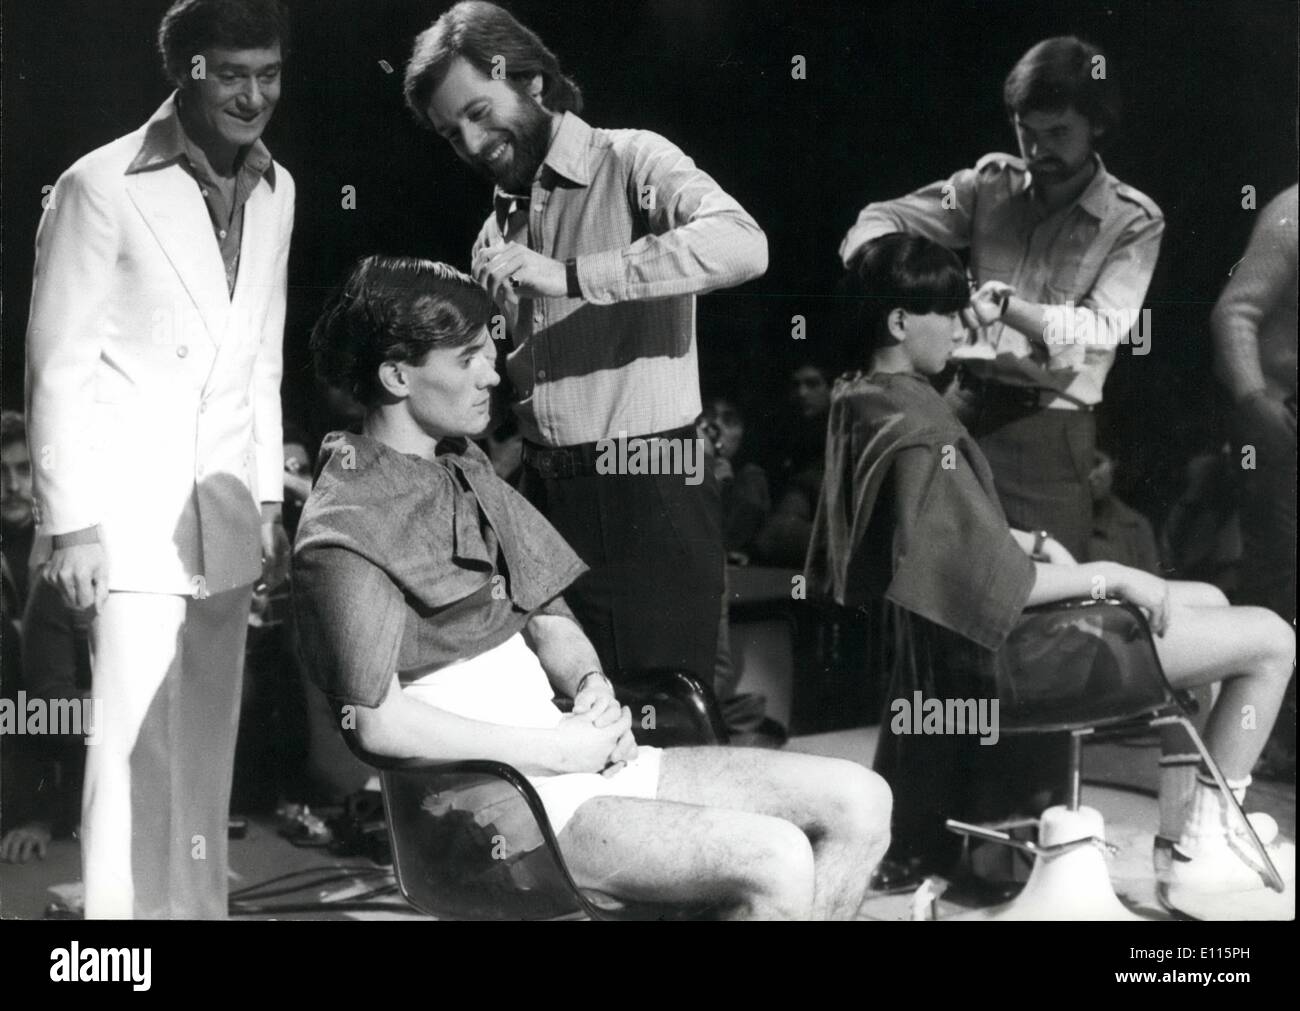 Jan. 01, 1976 - King of the Coiffure Vidal Sassoon holds a Two day teach in at the Royal Albert Hall; Photo Shows Hairdresser Vidal Sassoon (left) stands by as member of his staff demonstrates their skills in front of the large audience today. Stock Photo